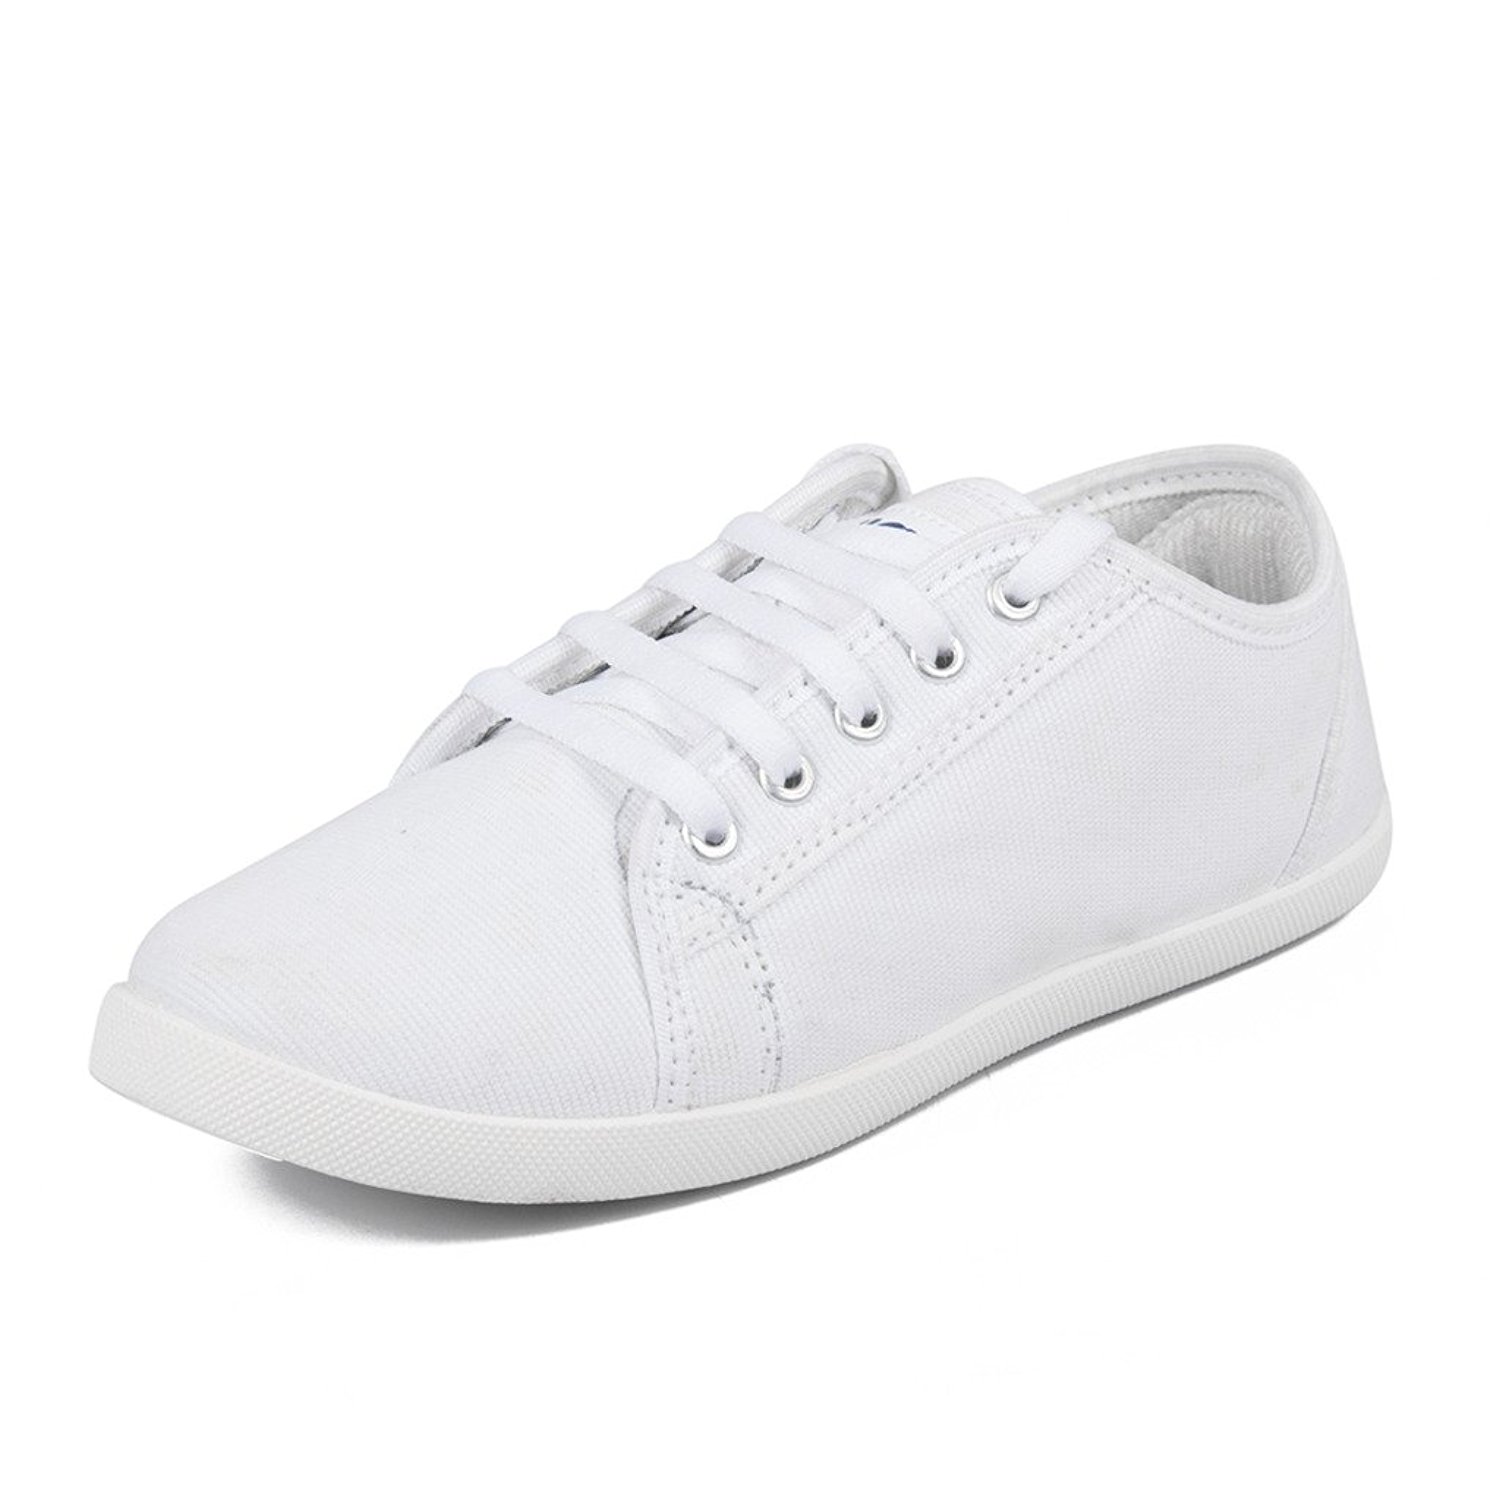 Asian Shoes SPICY 51 White Women's Casual Shoes: Buy Online at Low ...